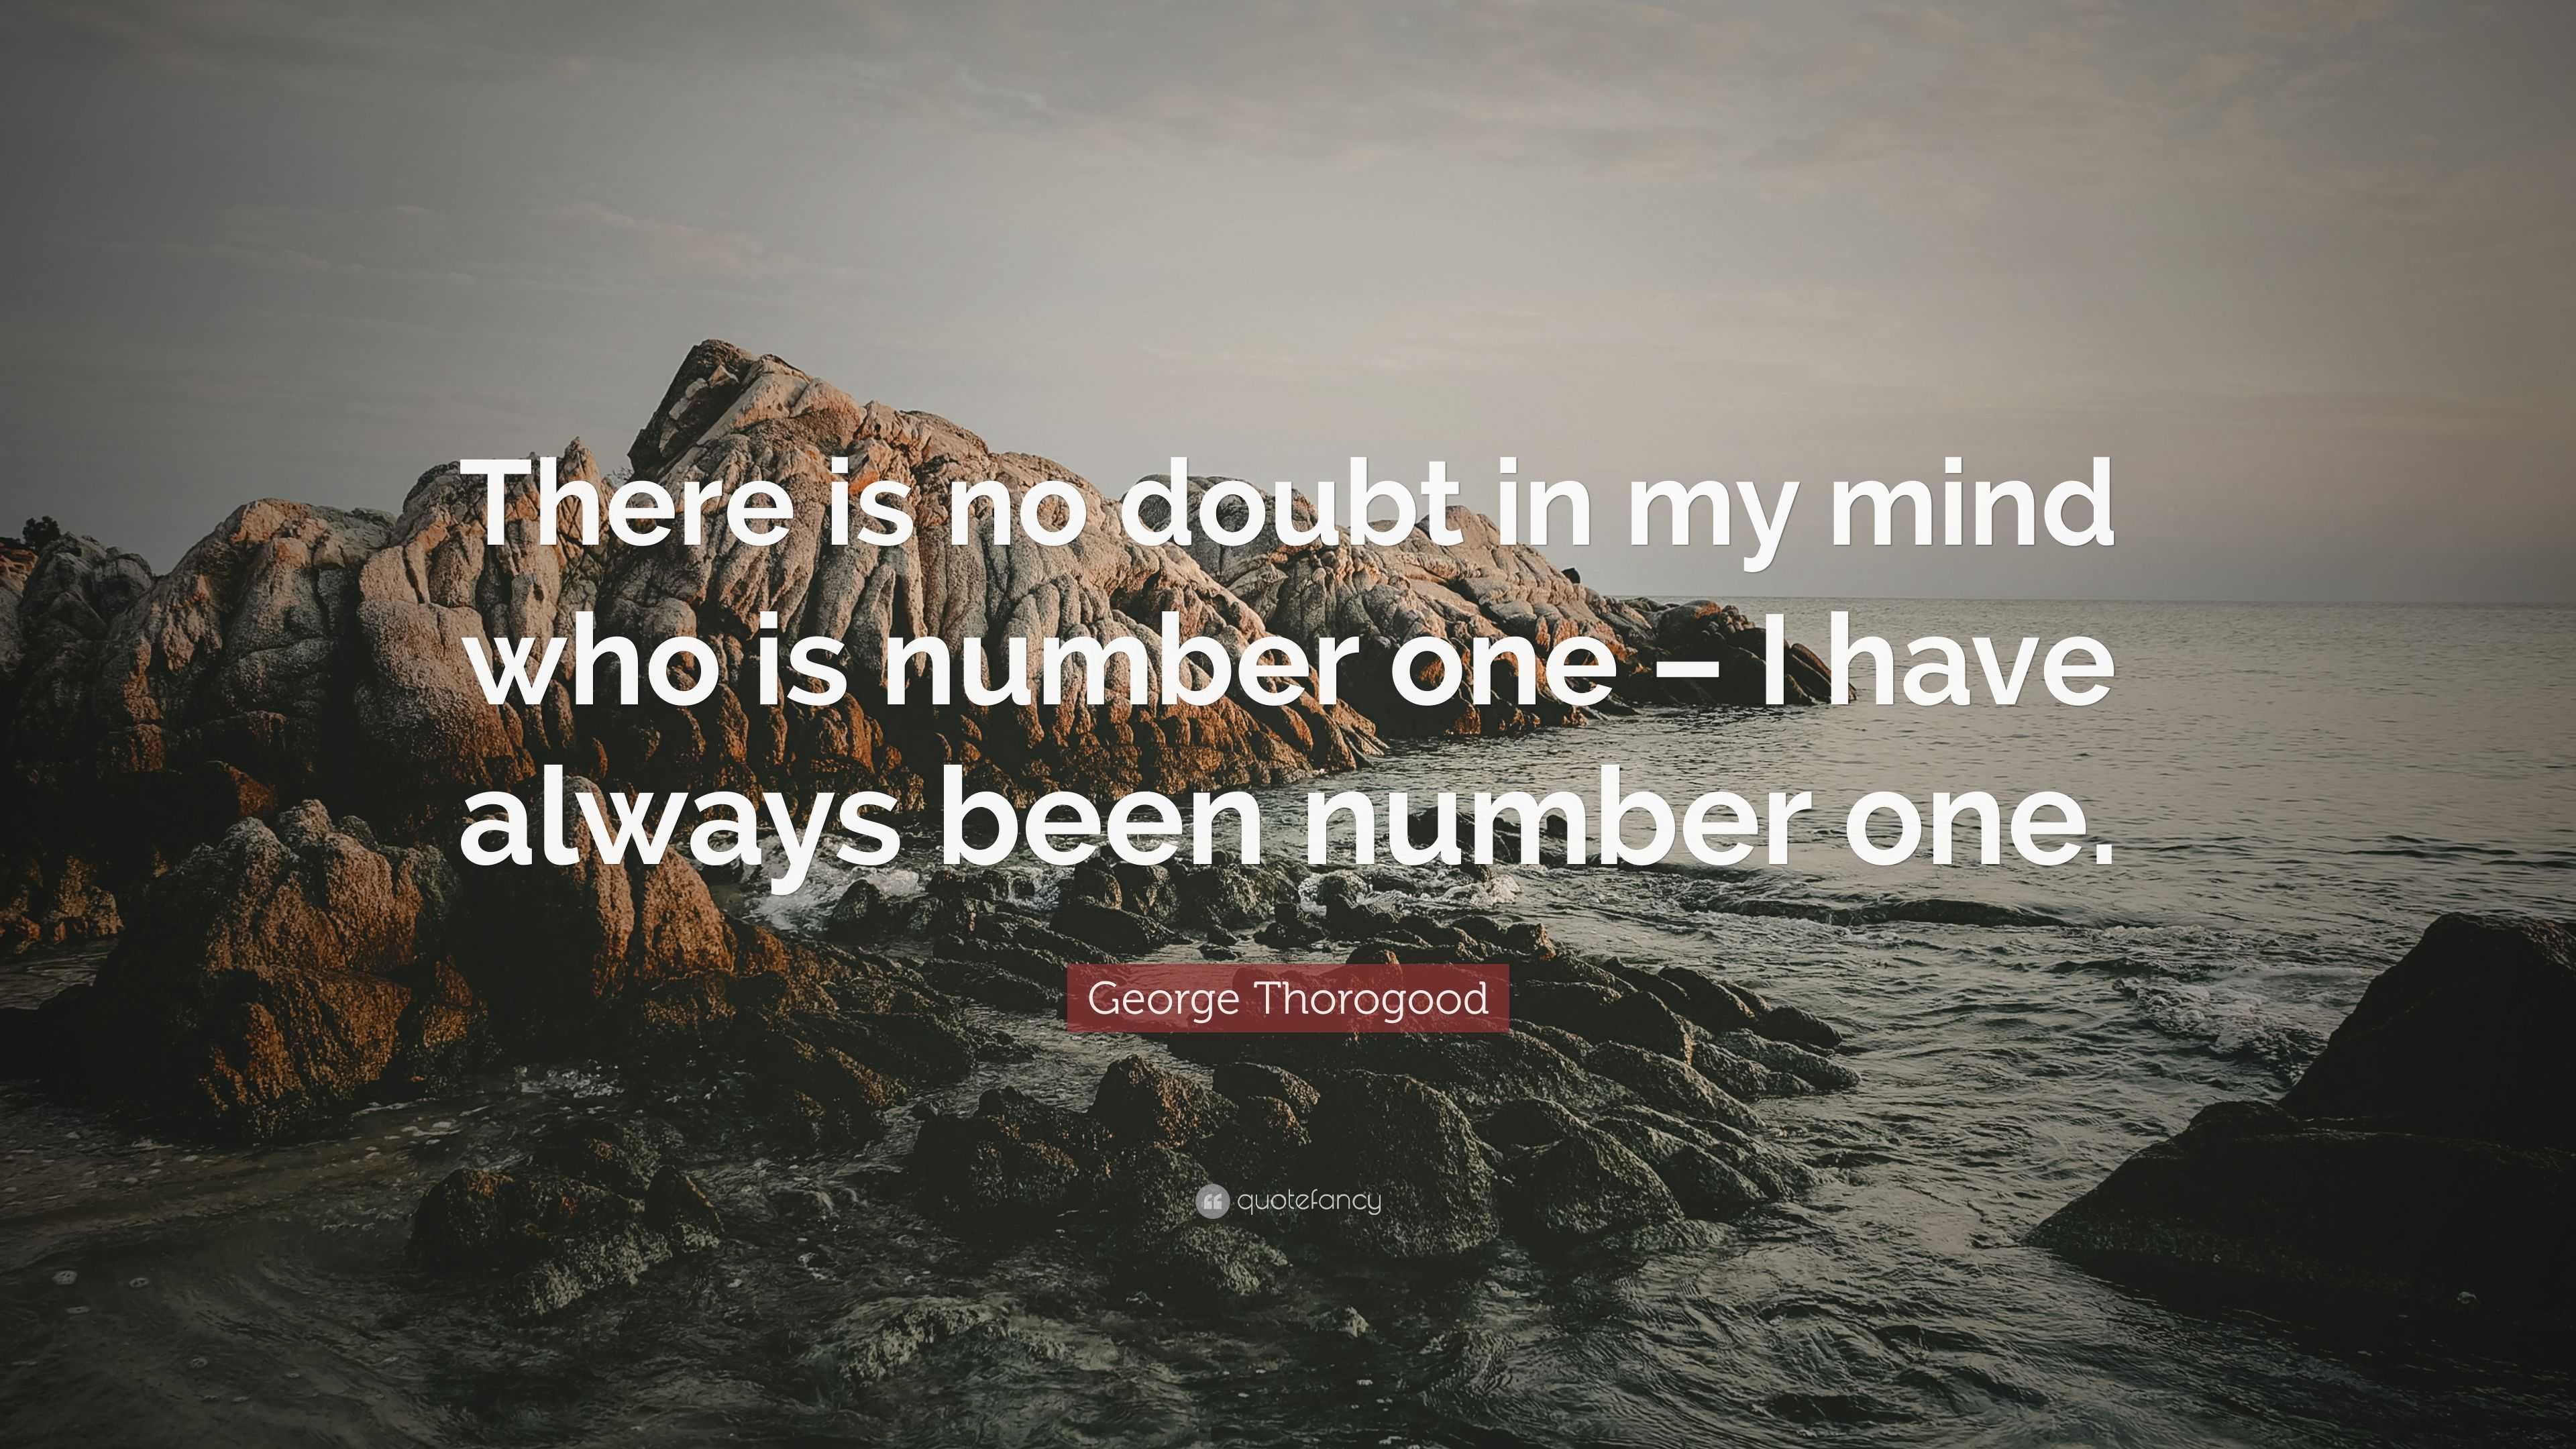 George Thorogood Quote: “There is no doubt in my mind who is number one – I have always been ...